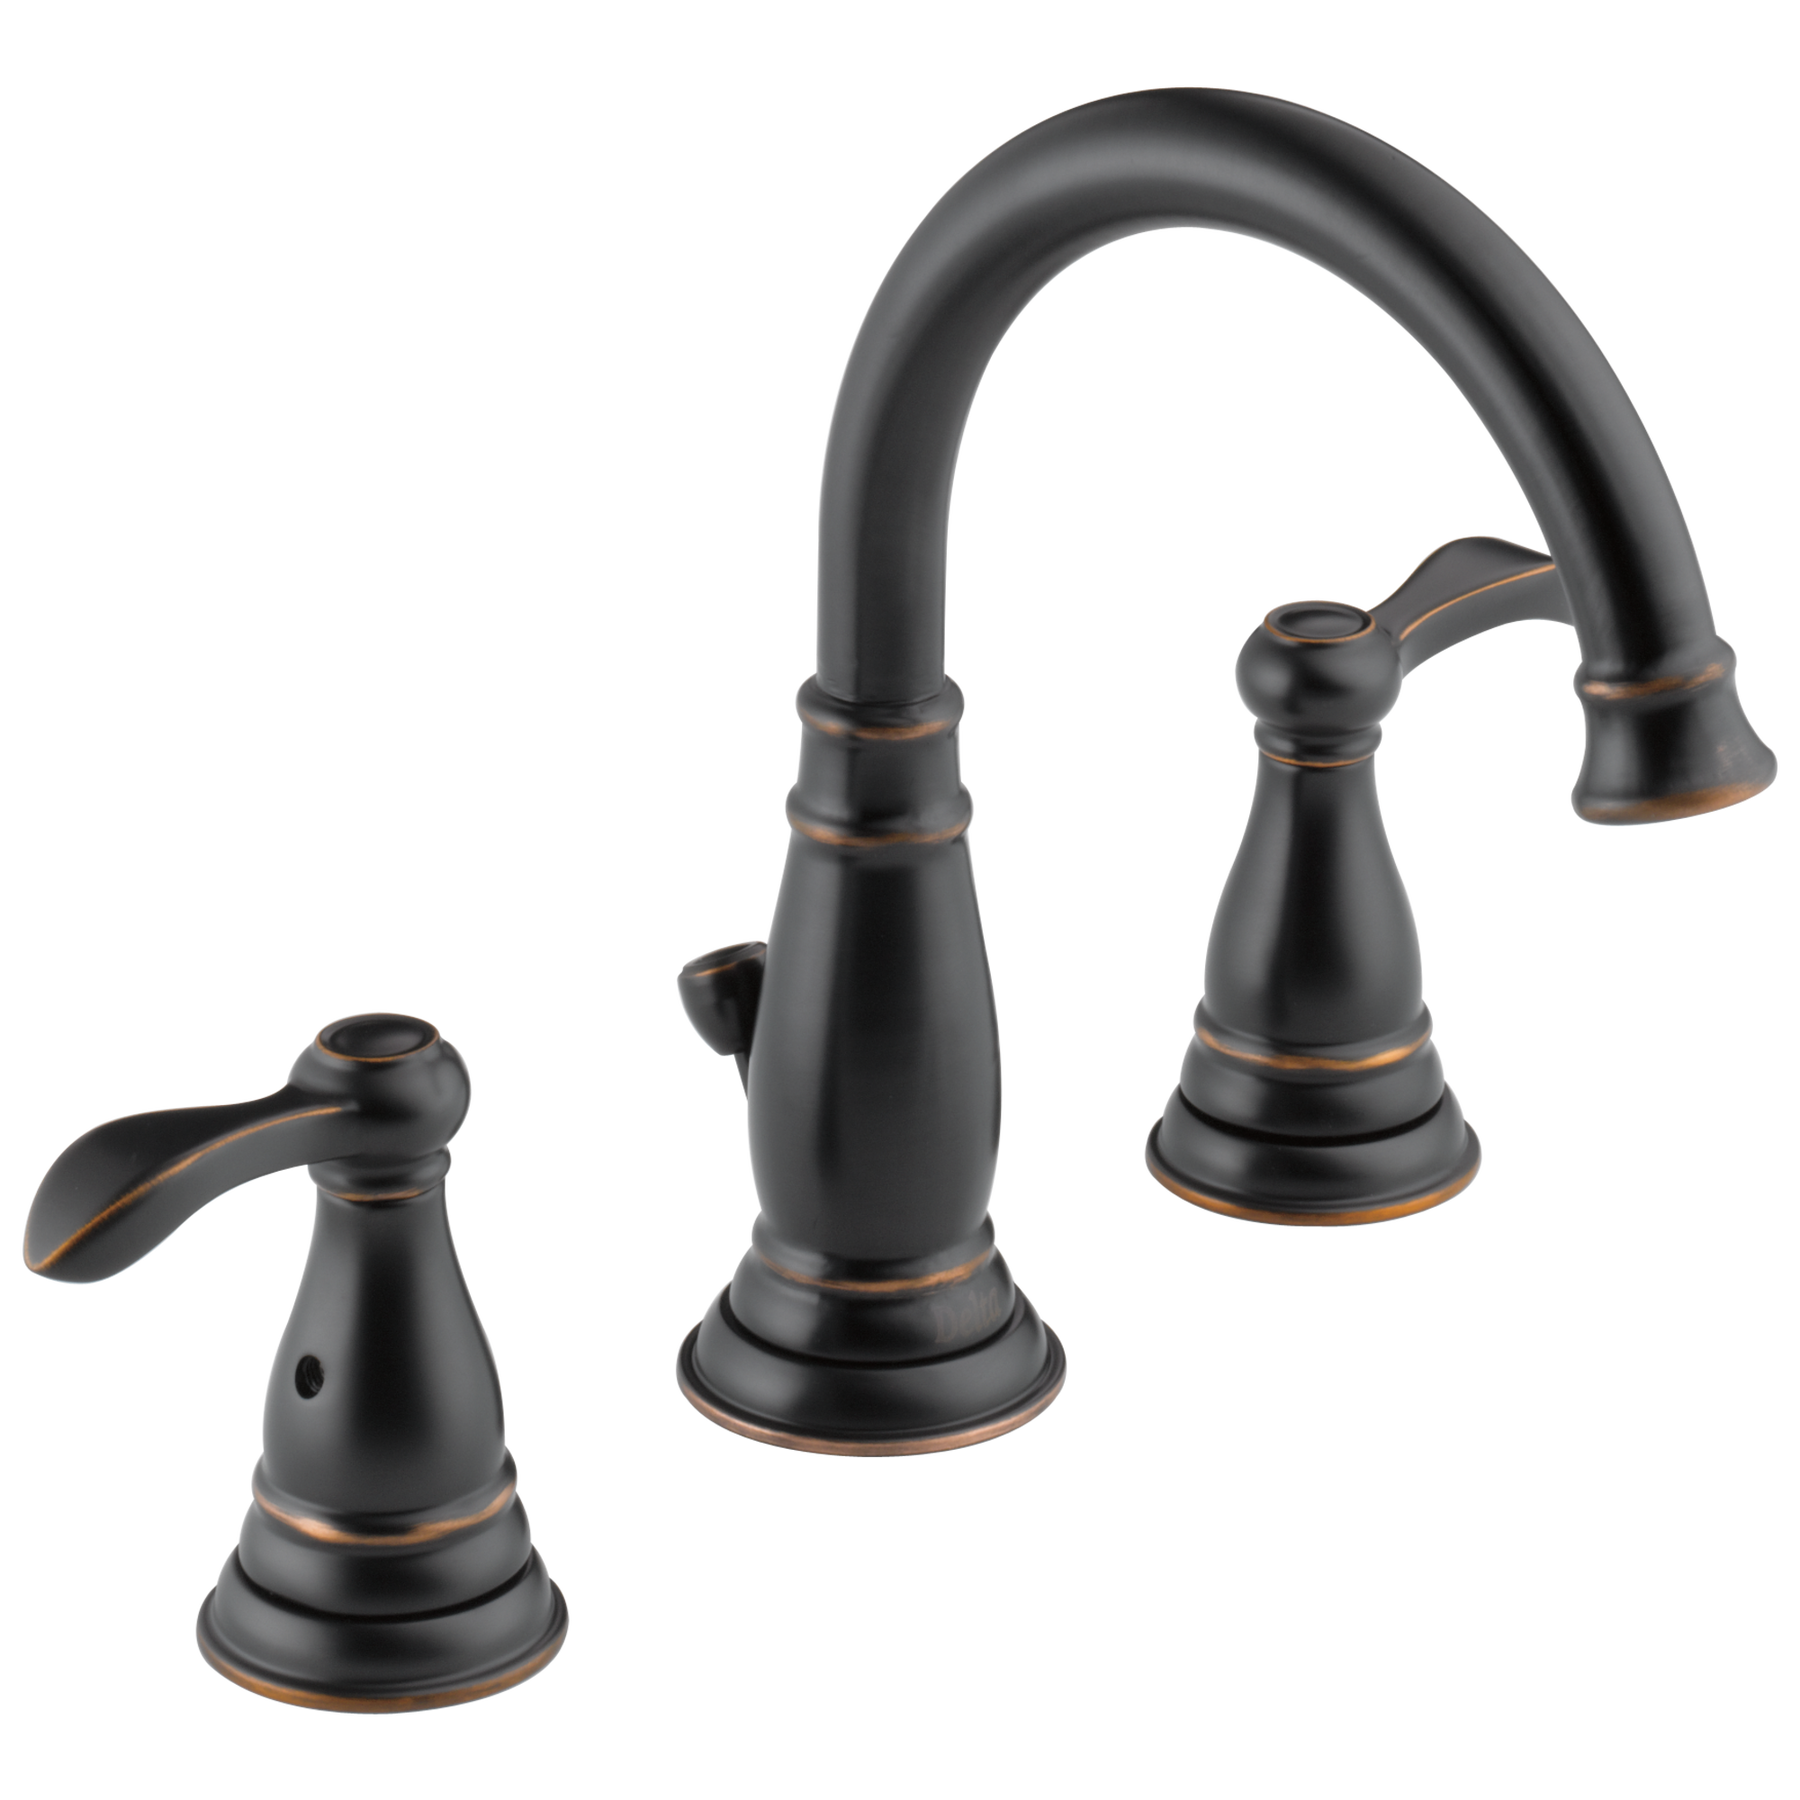 Two Handle Widespread Bathroom Faucet in Oil Rubbed Bronze 35984LF-OB-ECO